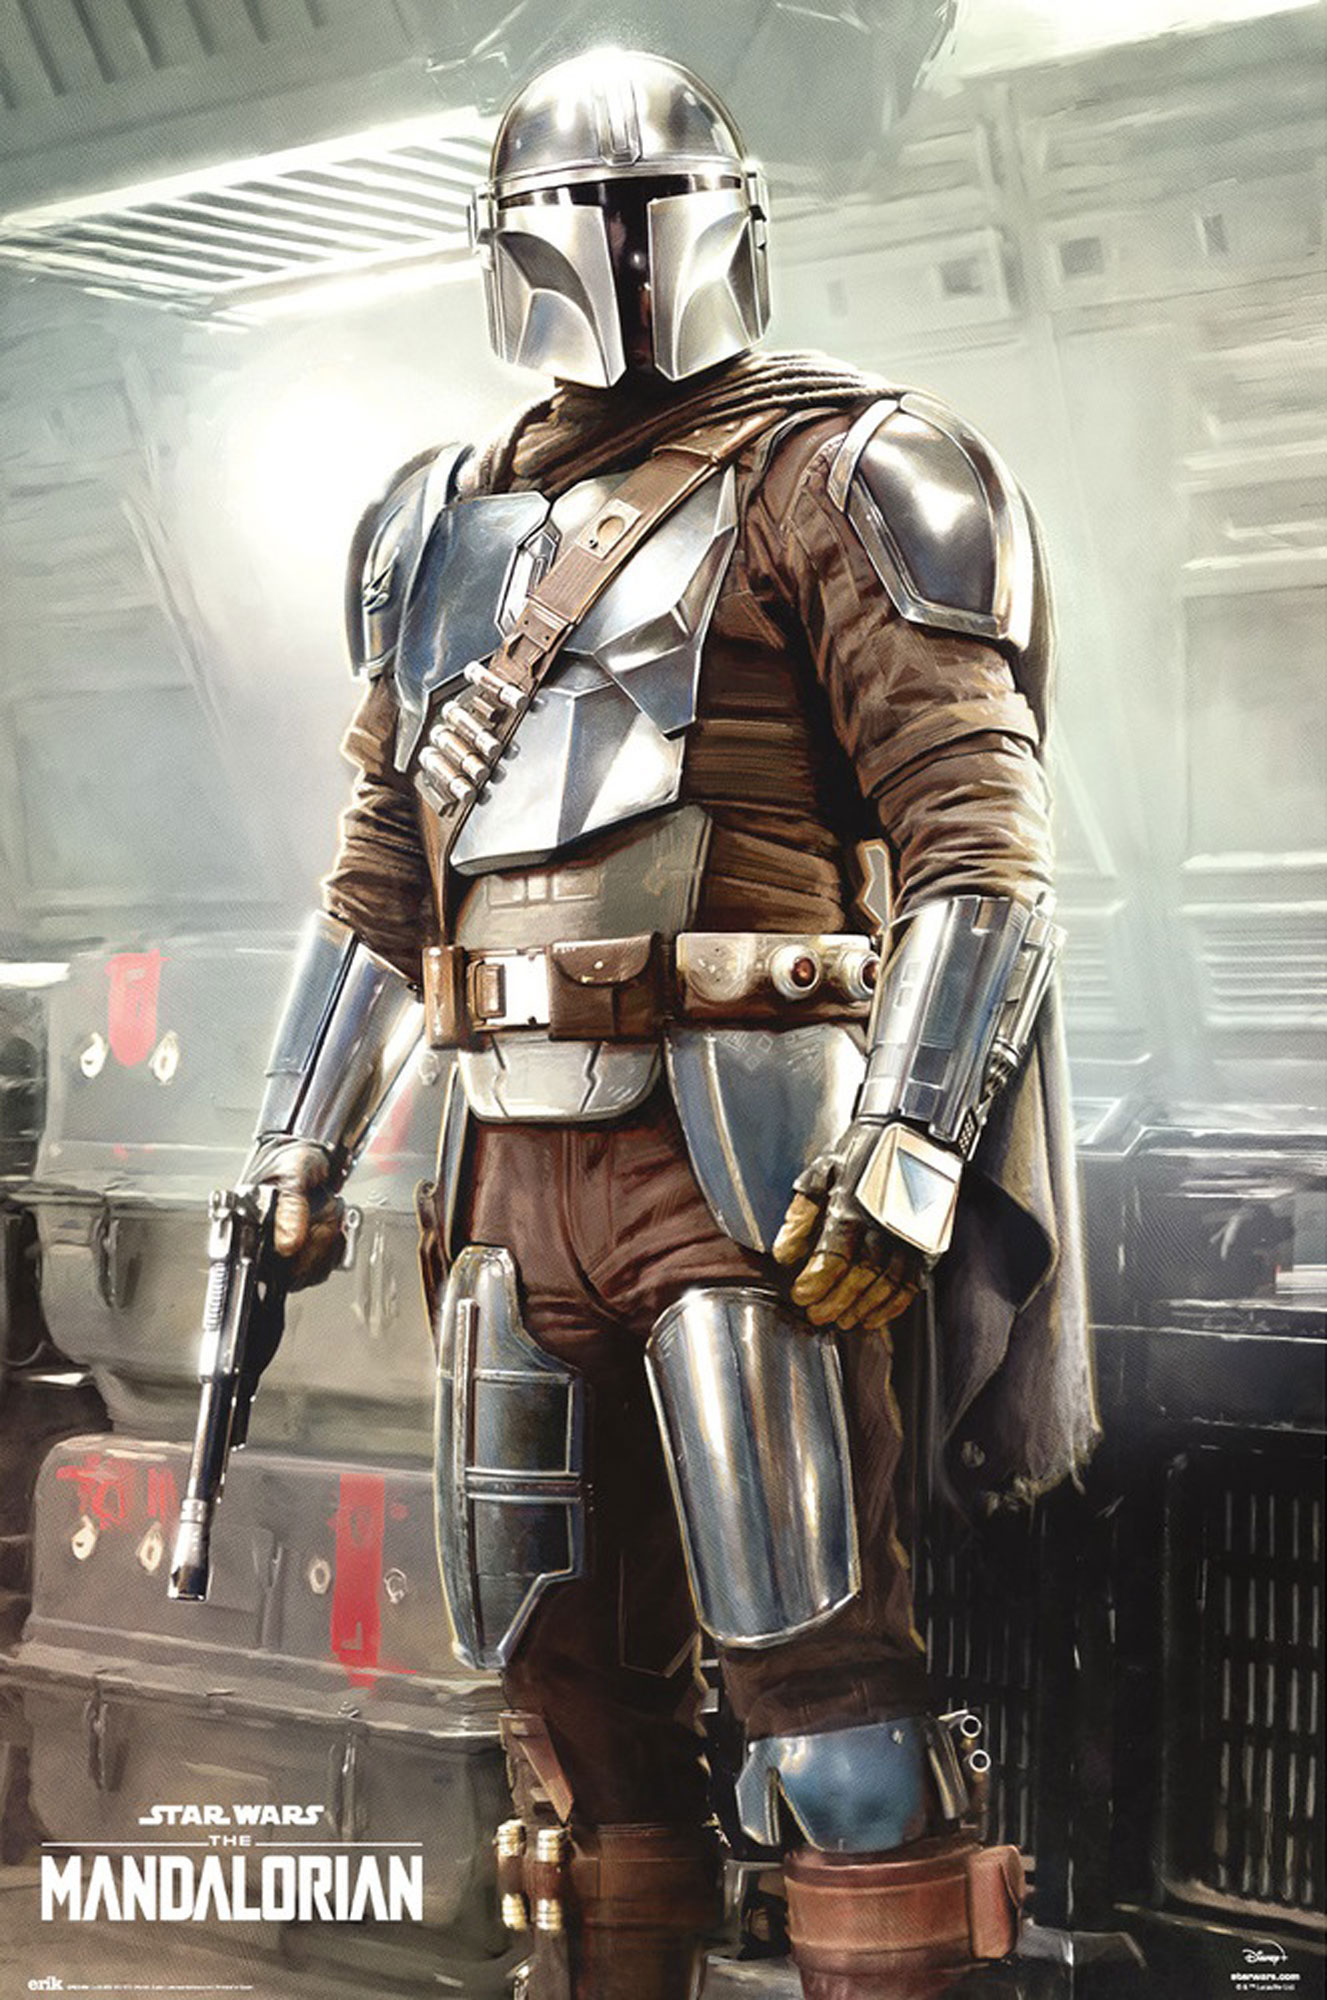 Star Wars - The Mandalorian Way is - This the